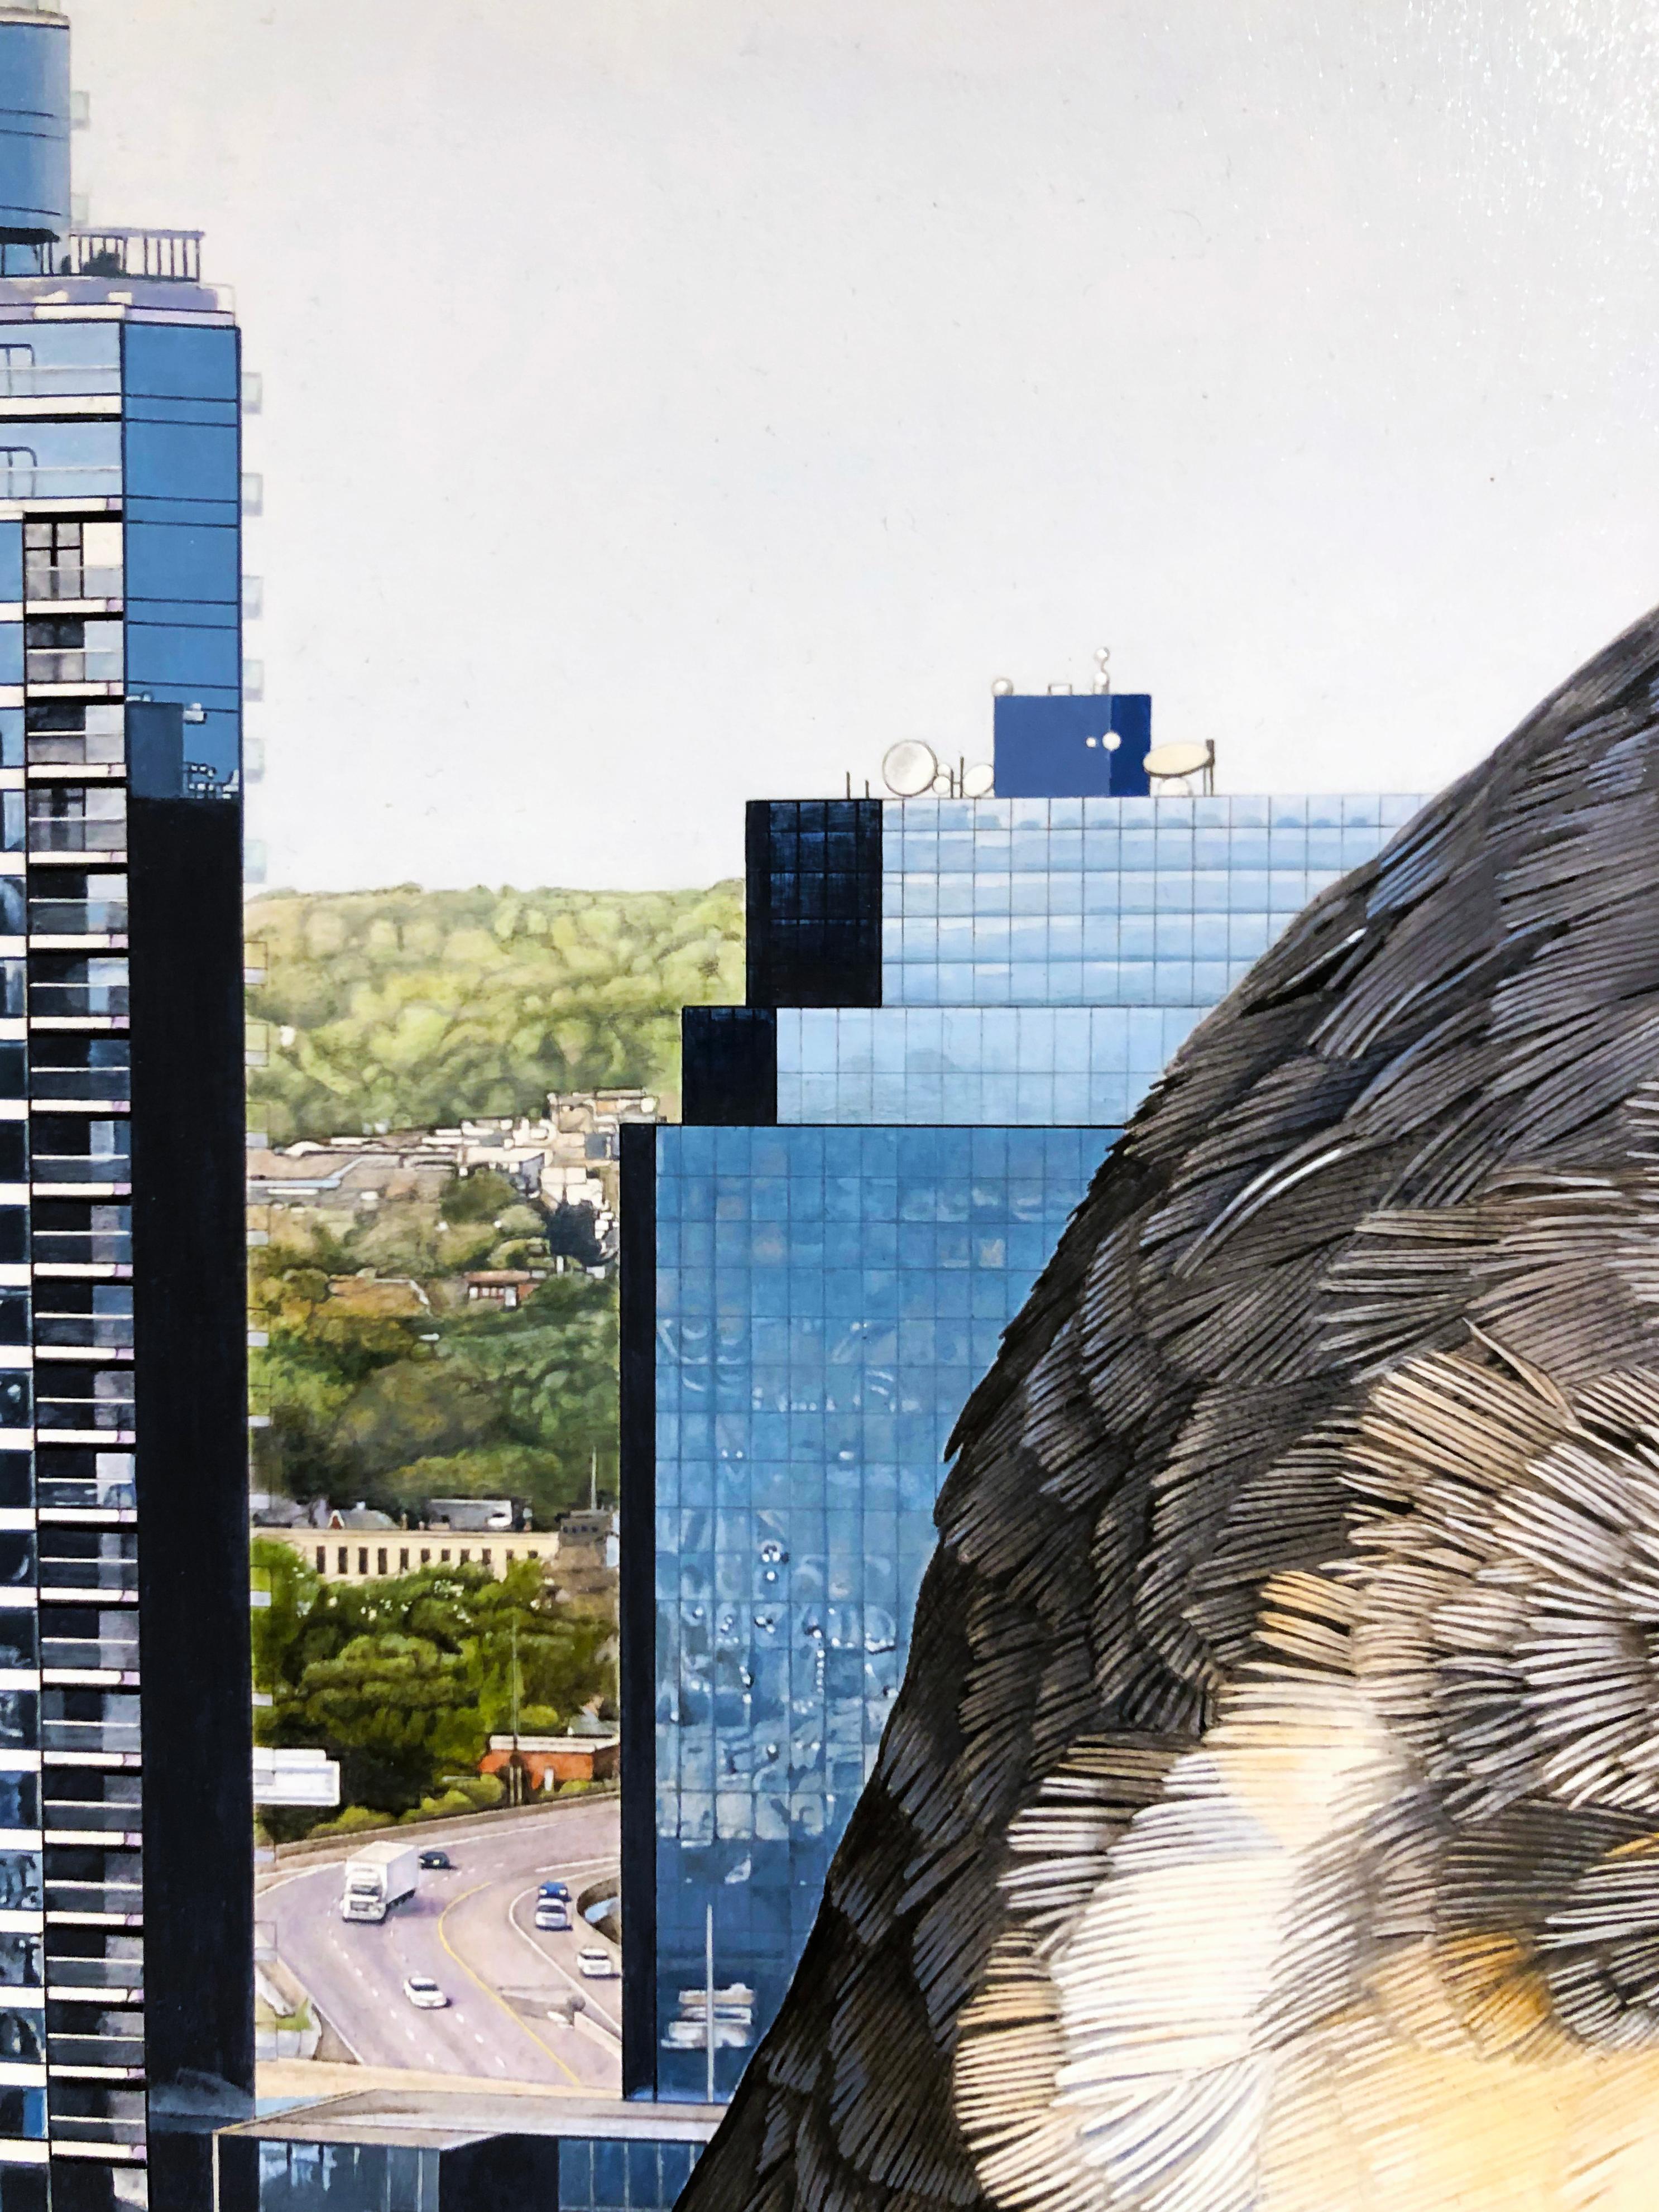 Peregrine City - Photorealist Painting of a Peregrine Falcon in an Urban Setting - Gray Animal Painting by Rick Pas